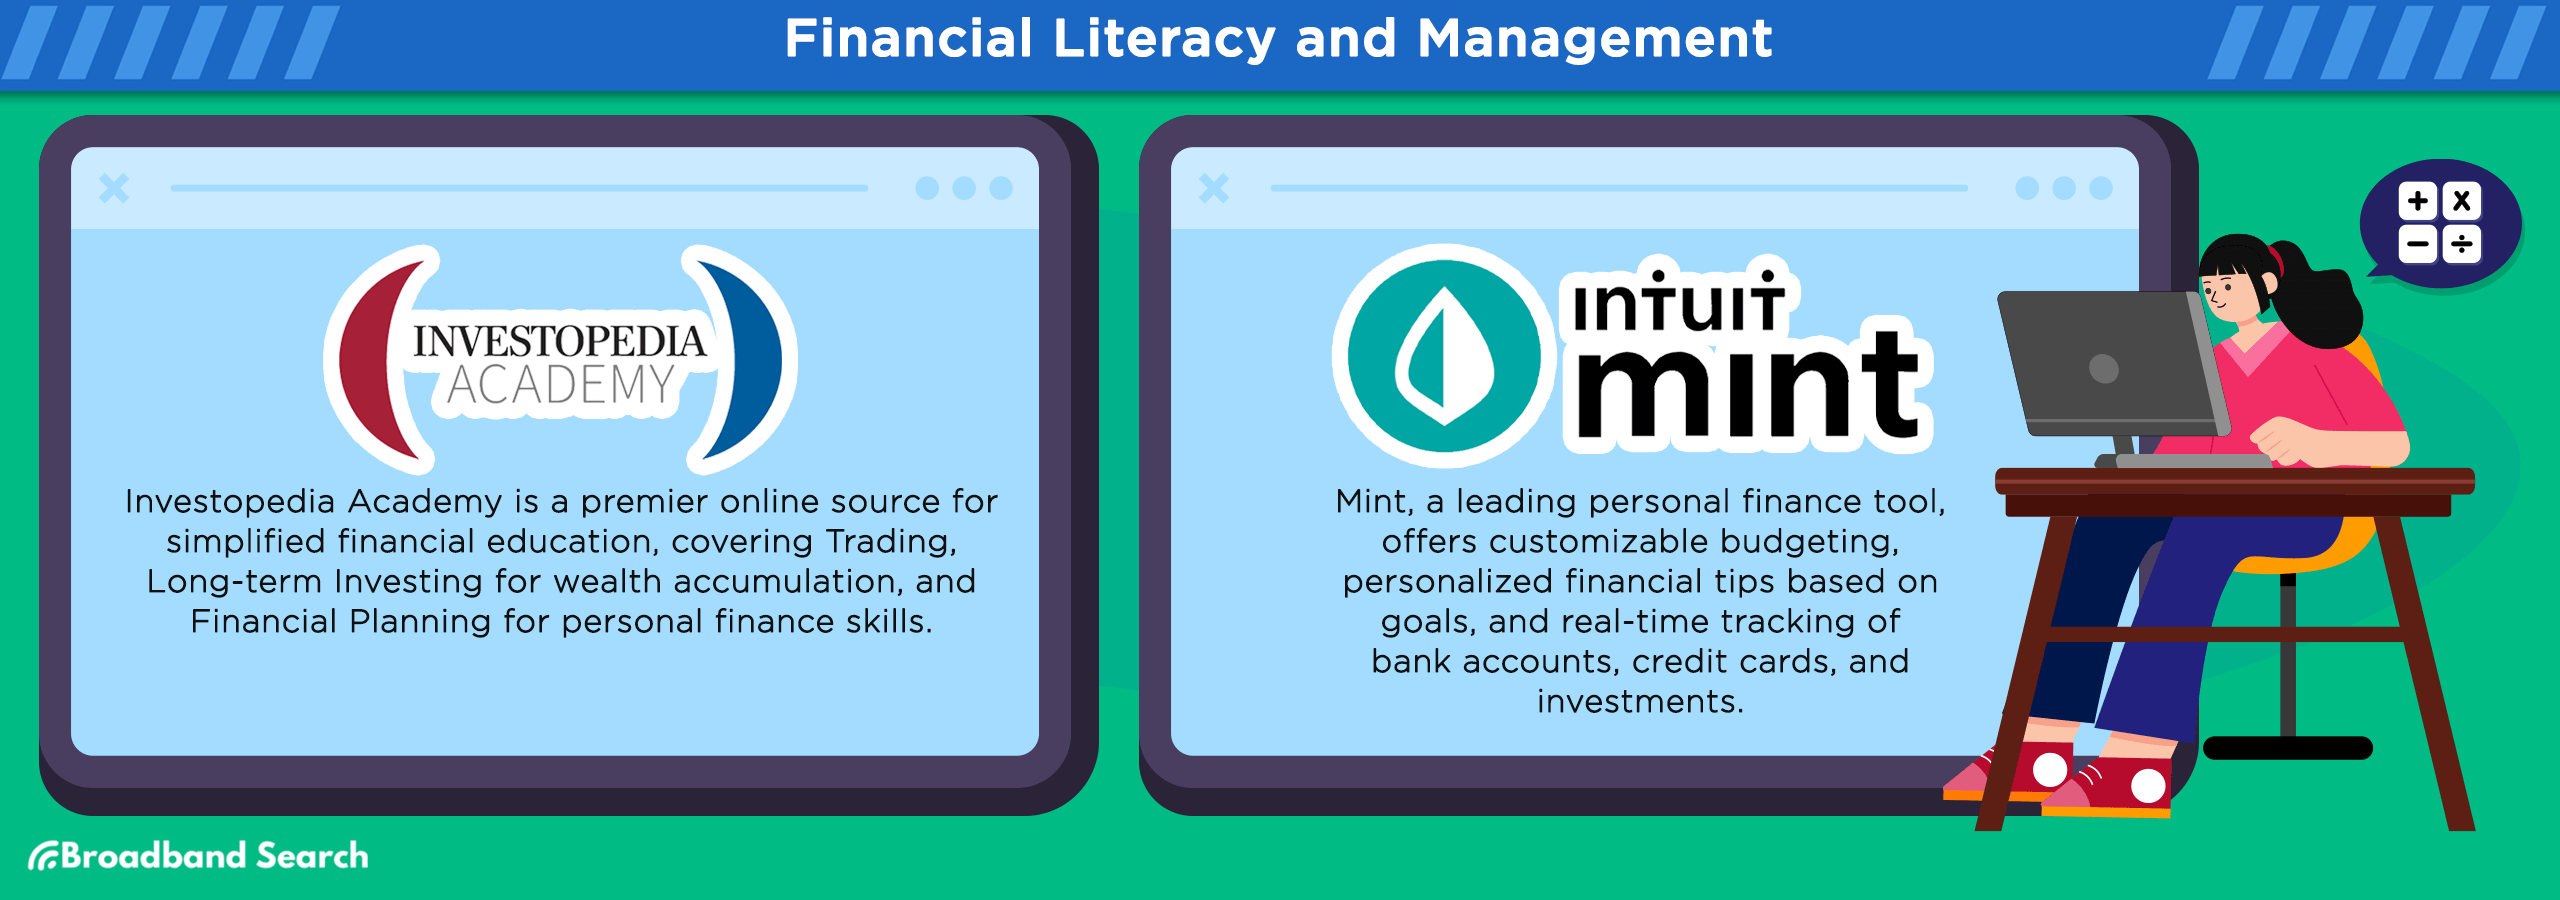 Financial Literacy and Management